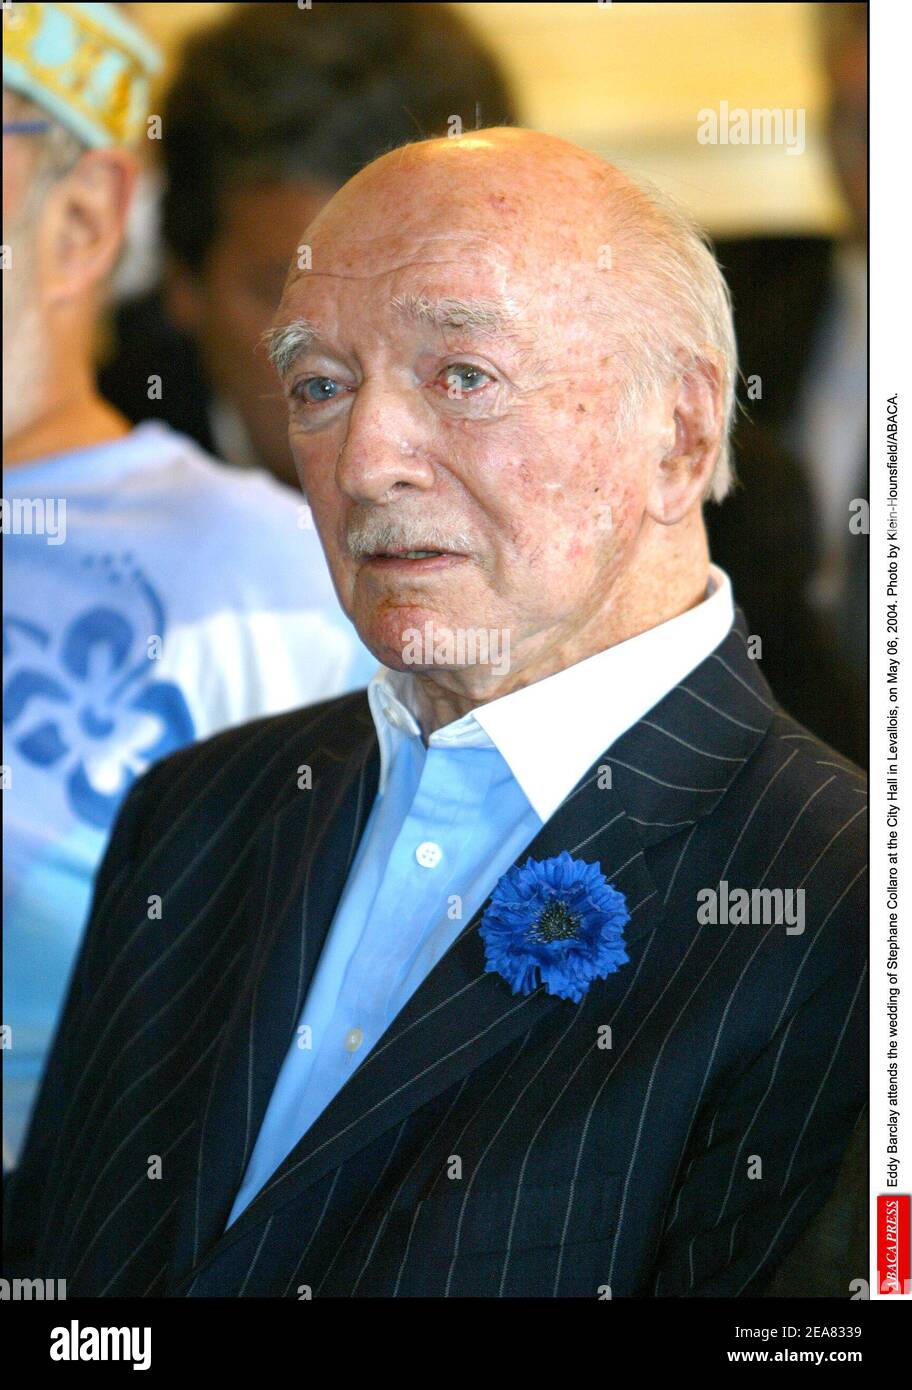 Eddie Barclay attends the wedding of Stephane Collaro at the City Hall in Levallois, on May 06, 2004. Photo by Klein-Hounsfield/ABACA. Stock Photo